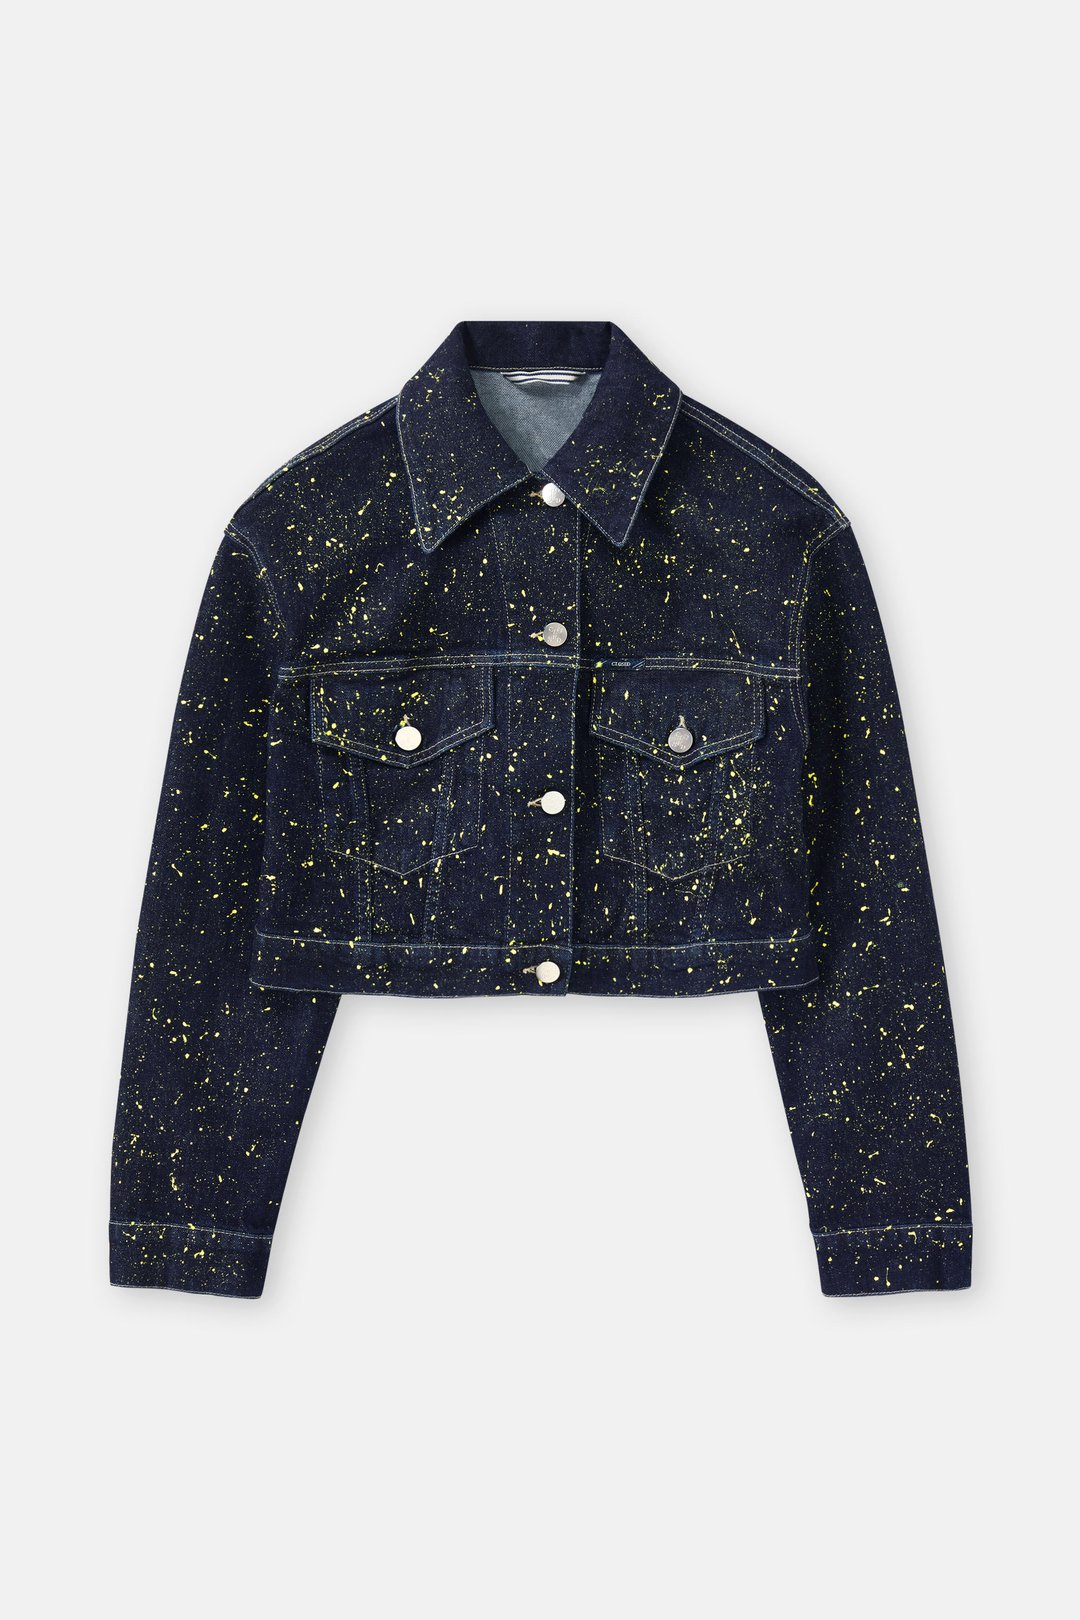 Symbol Patches recycled denim jacket | Moschino Official Store